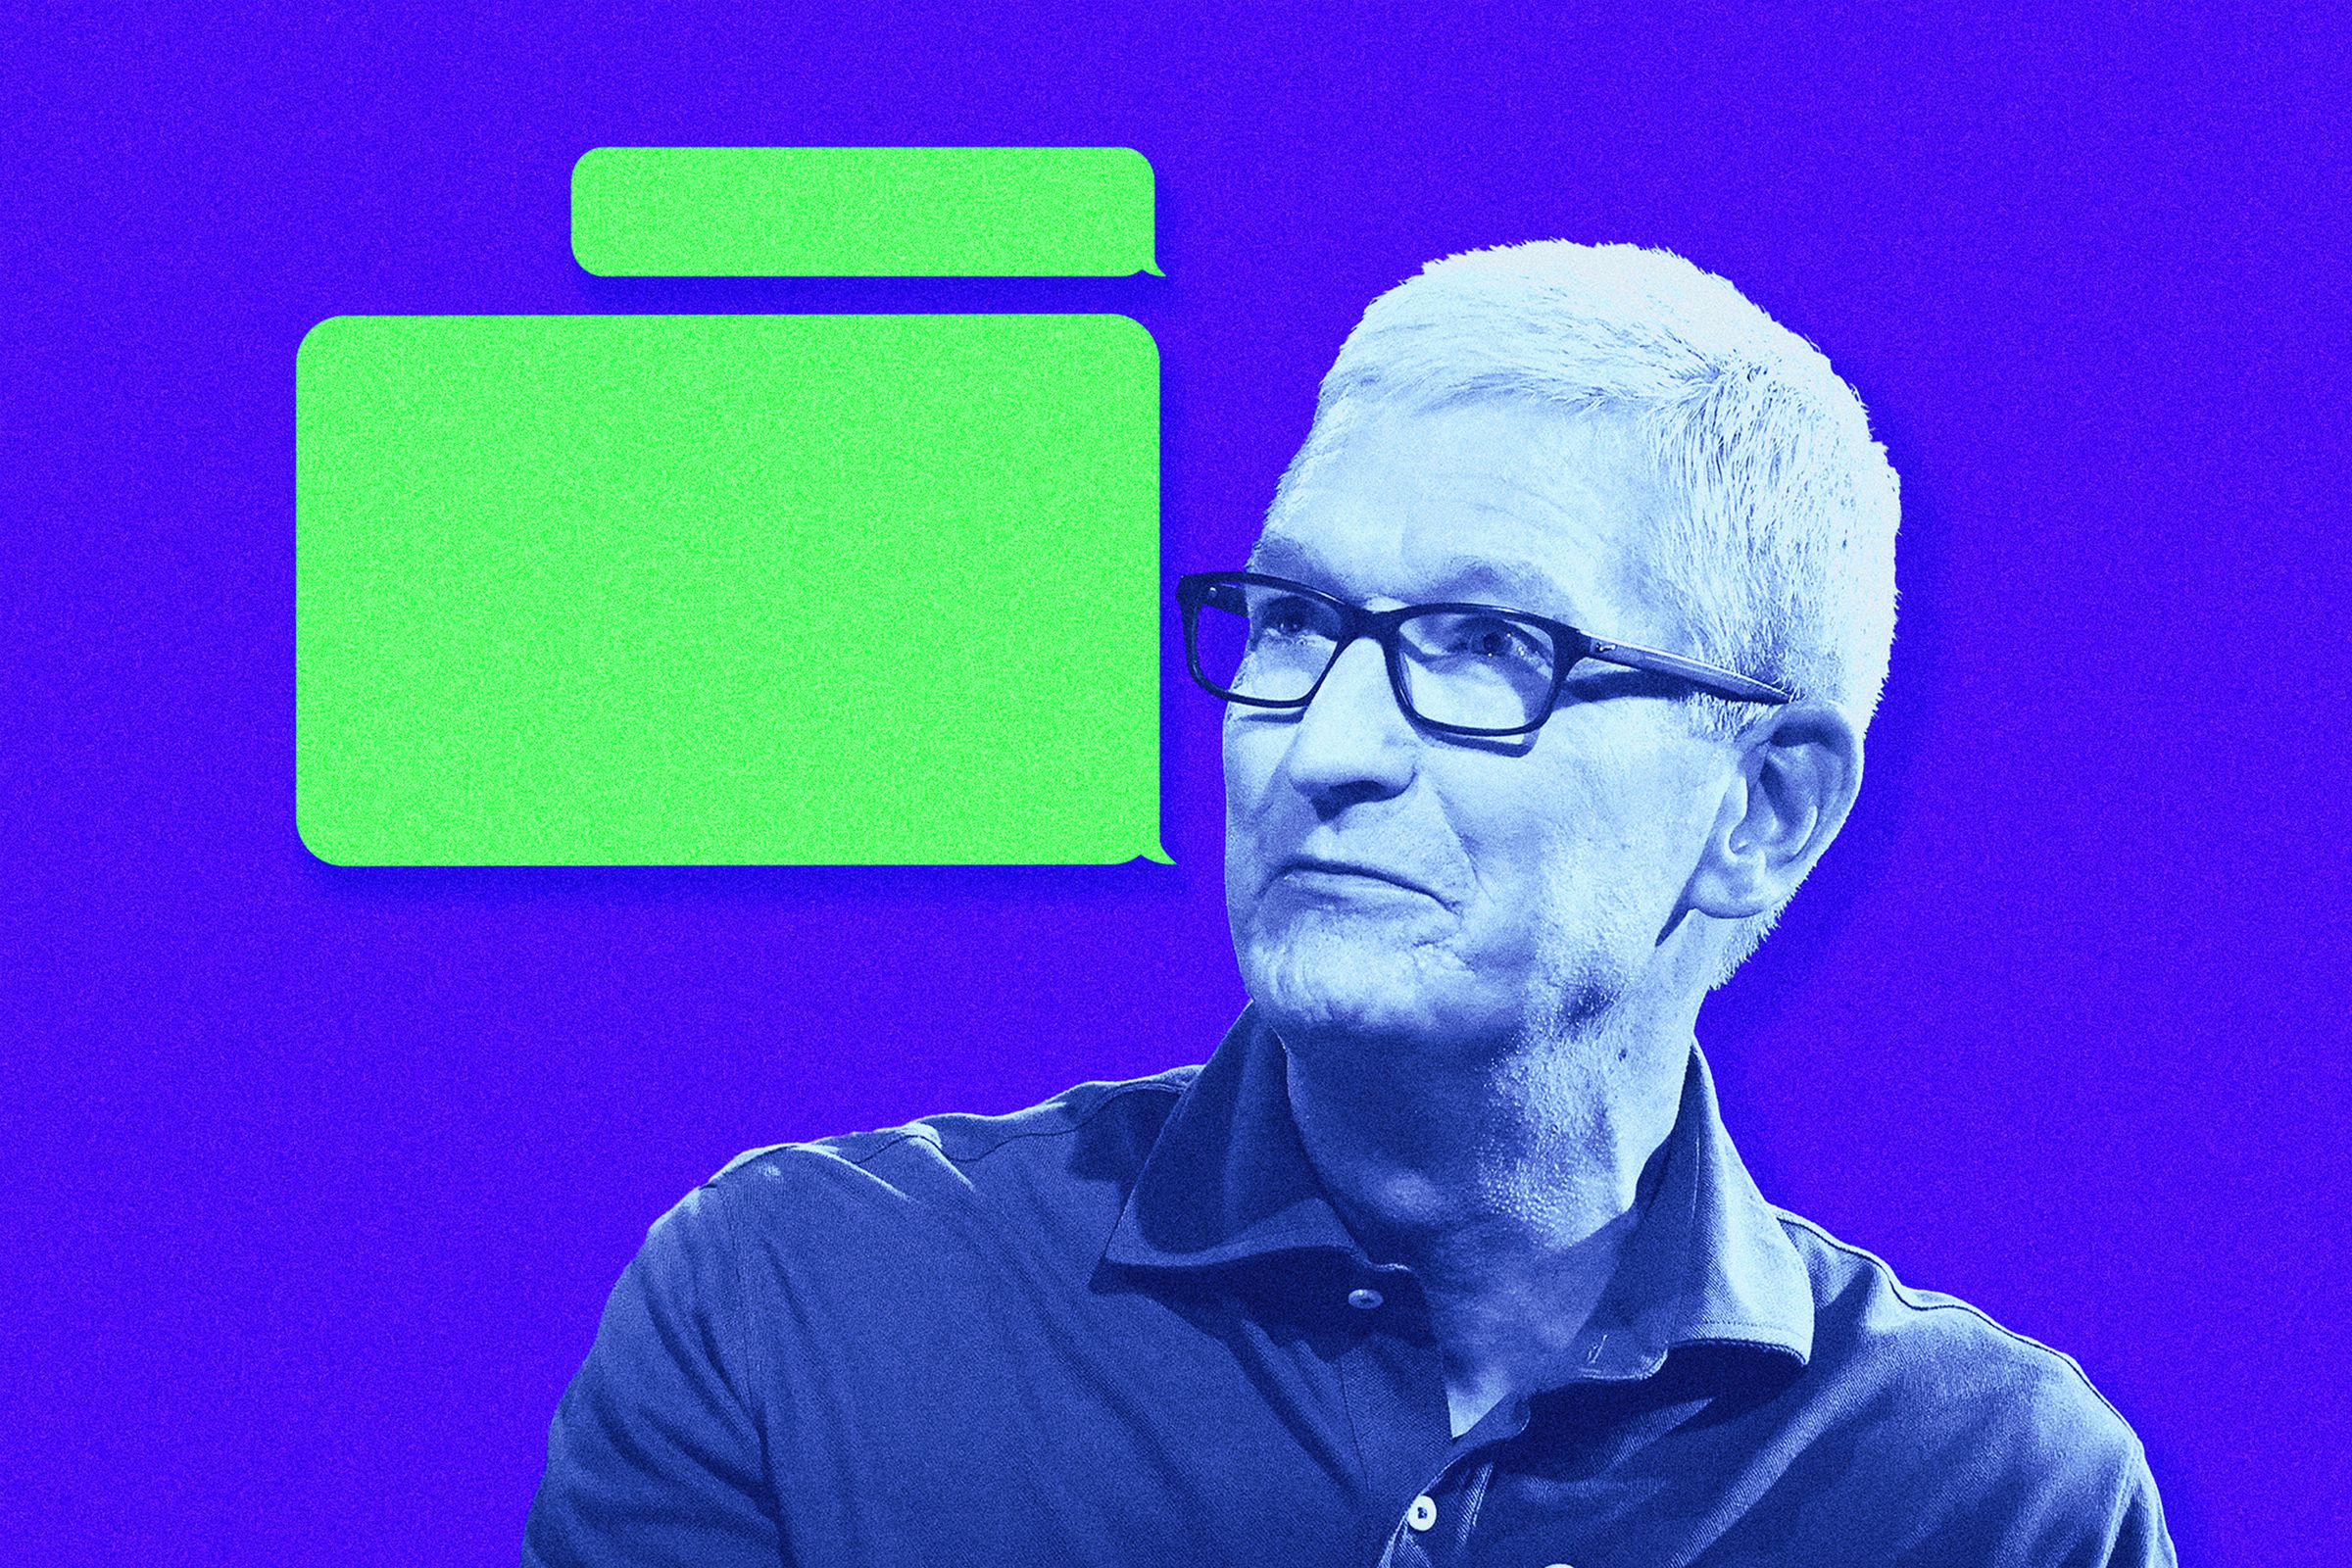 Apple CEO Tim Cook on a blue background with green message bubbles appearing near his mouth.